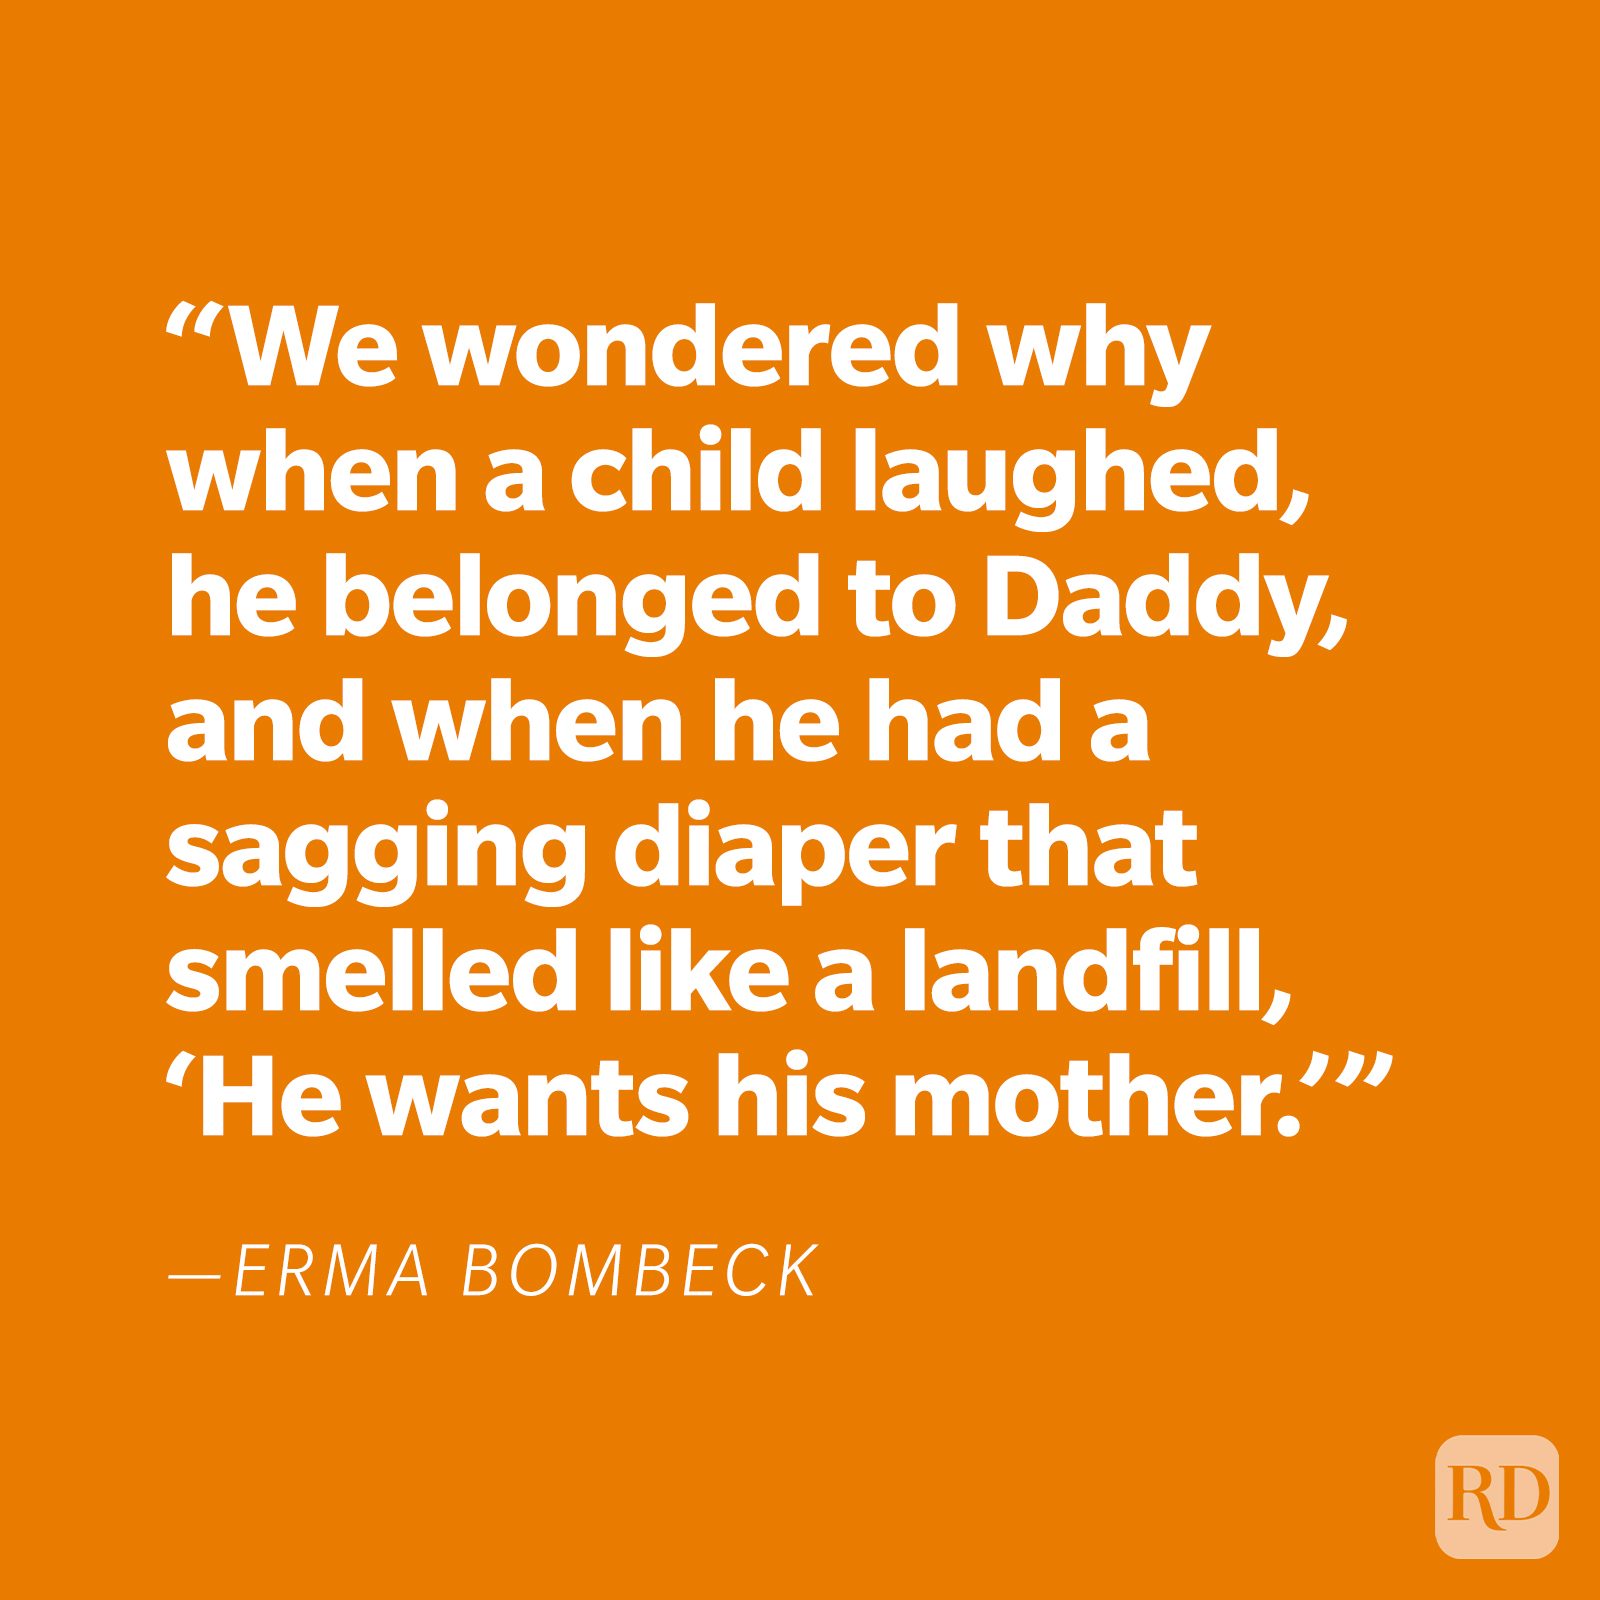 "We wondered why when a child laughed, he belonged to Daddy, and when he had a sagging diaper that smelled like a landfill, 'He wants his mother.'" —Erma Bombeck